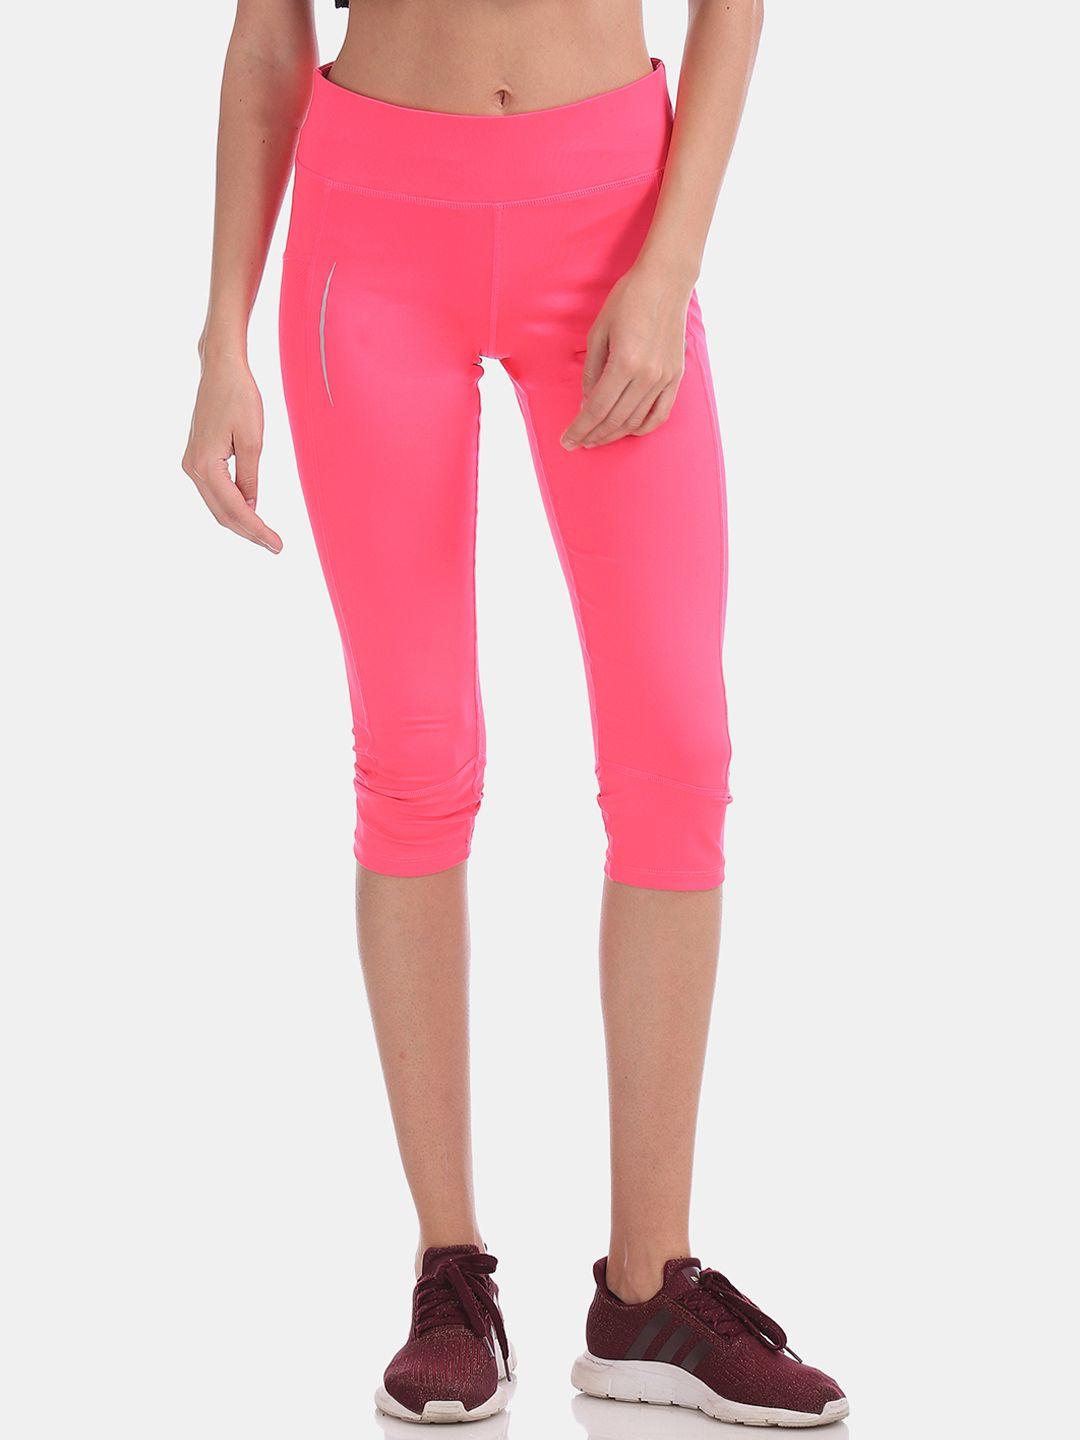 u.s. polo assn. women pink solid active cropped tights